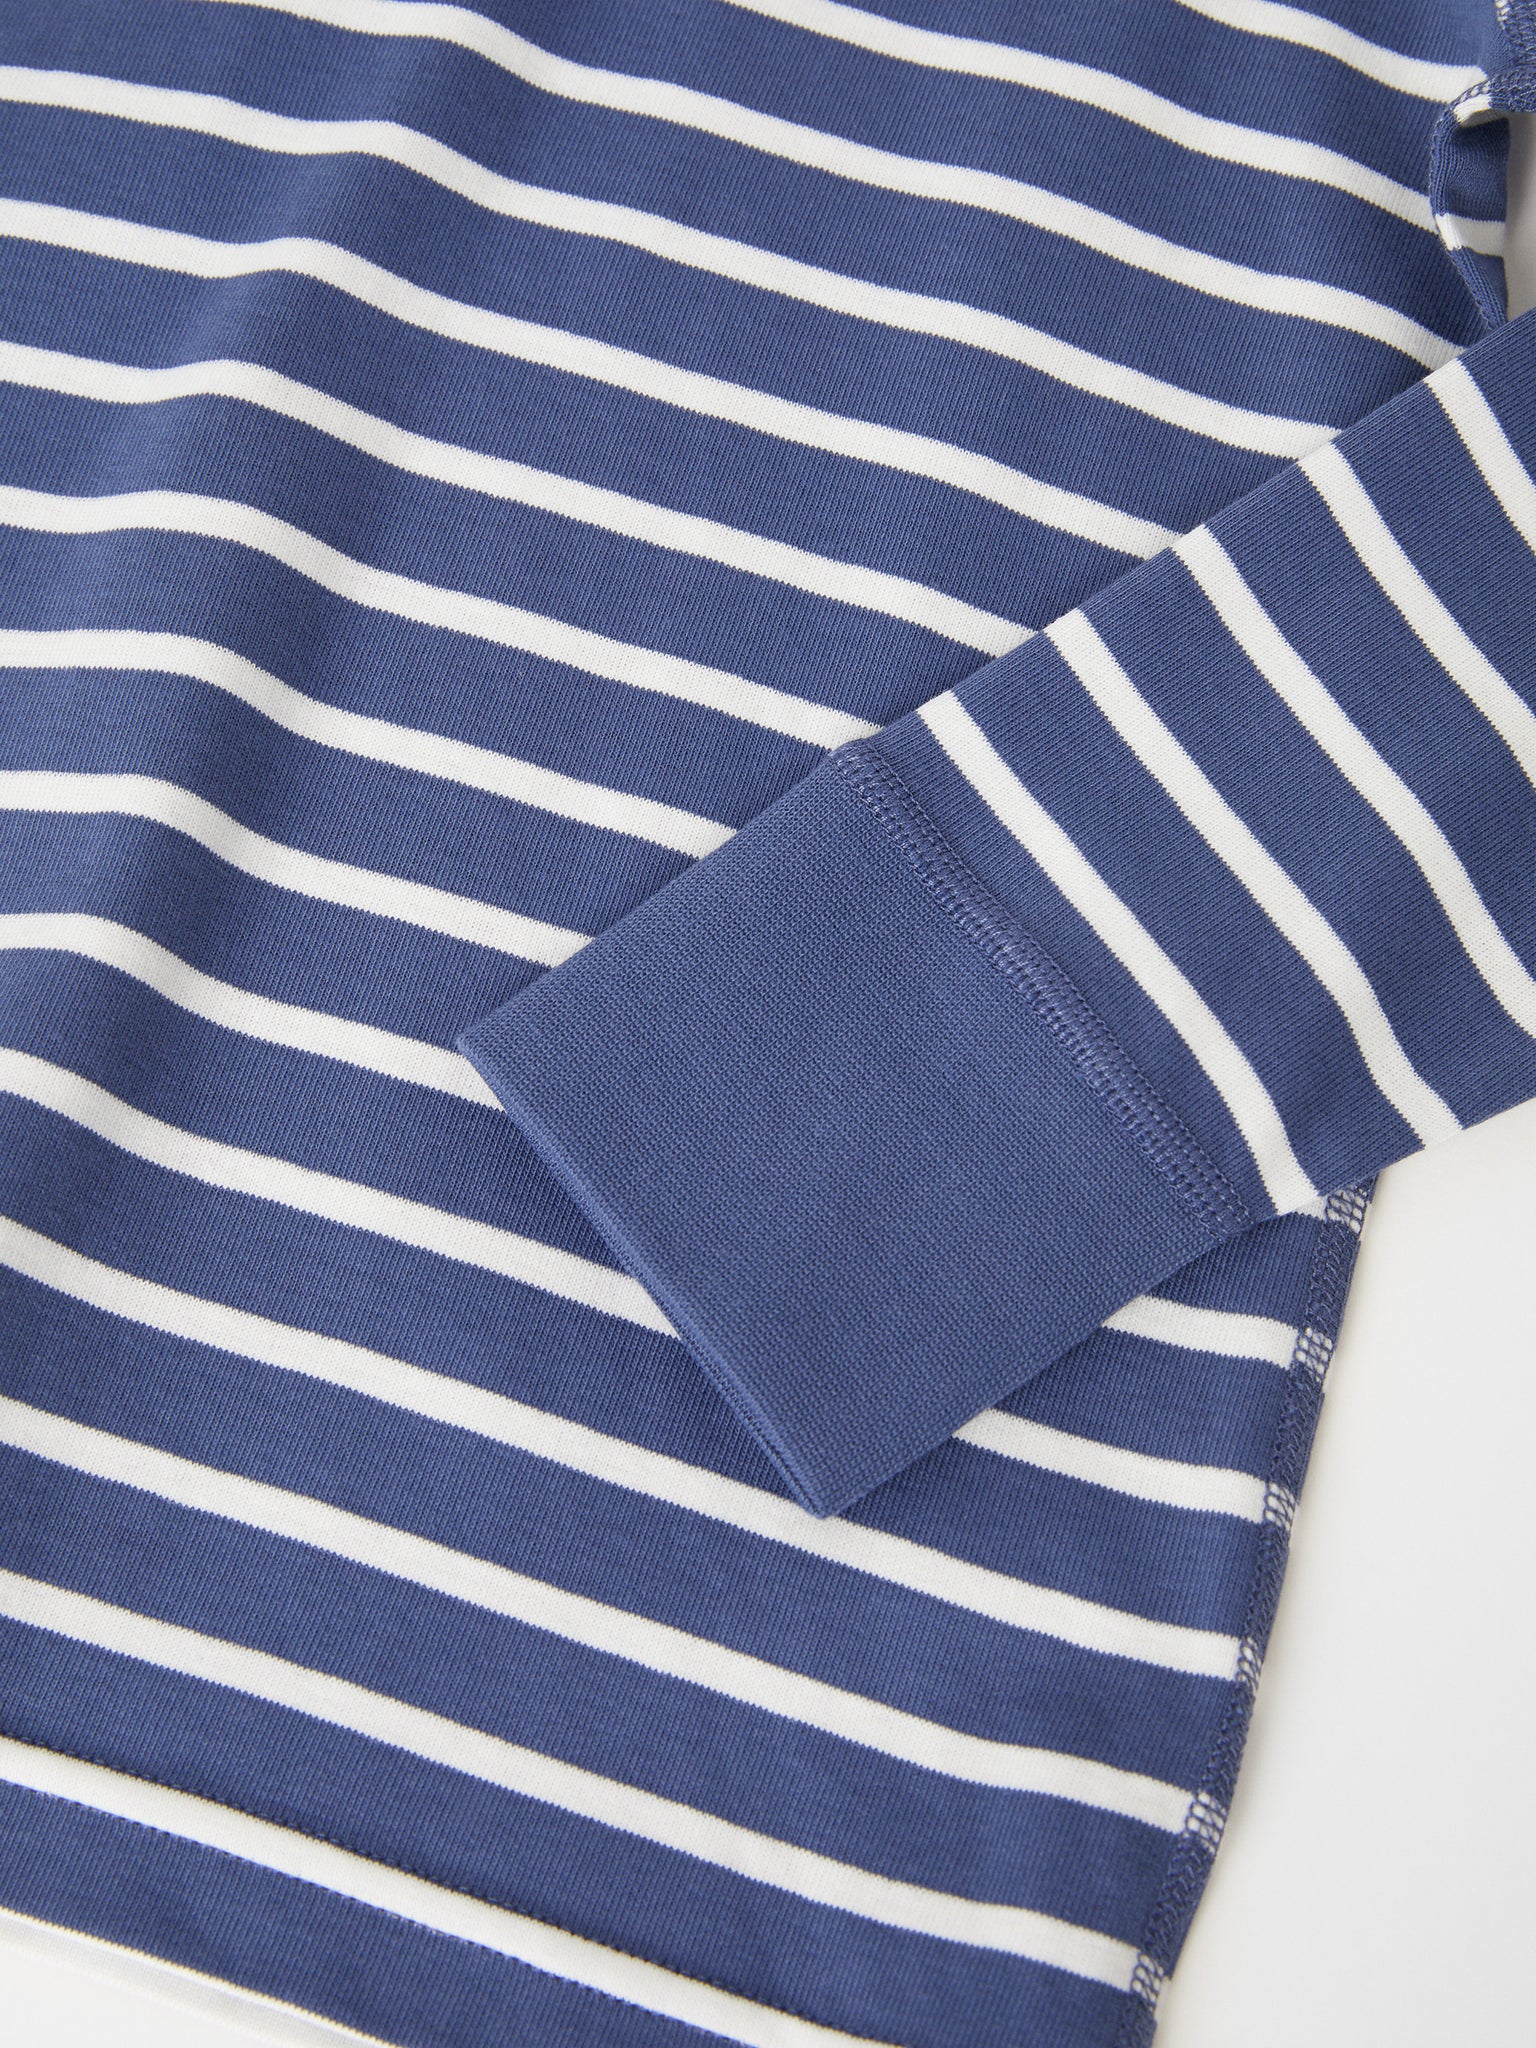 Striped Organic Cotton Blue Kids Top from the Polarn O. Pyret kids collection. Nordic kids clothes made from sustainable sources.